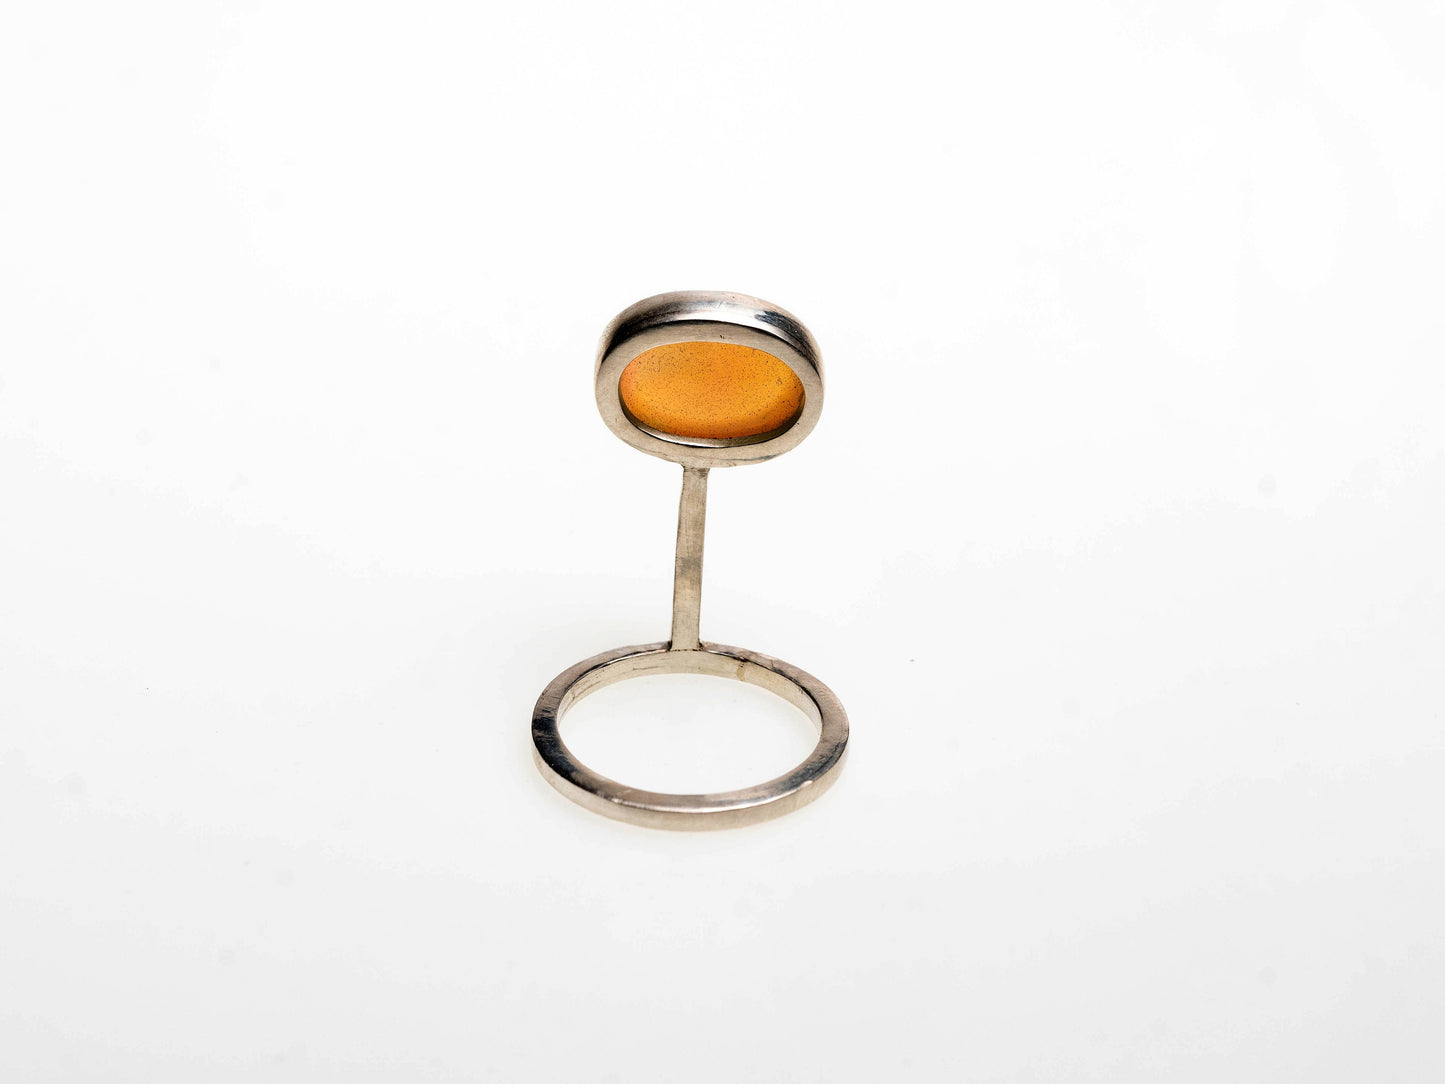 Minimalistic ring with oval-shaped natural Brazilian opal